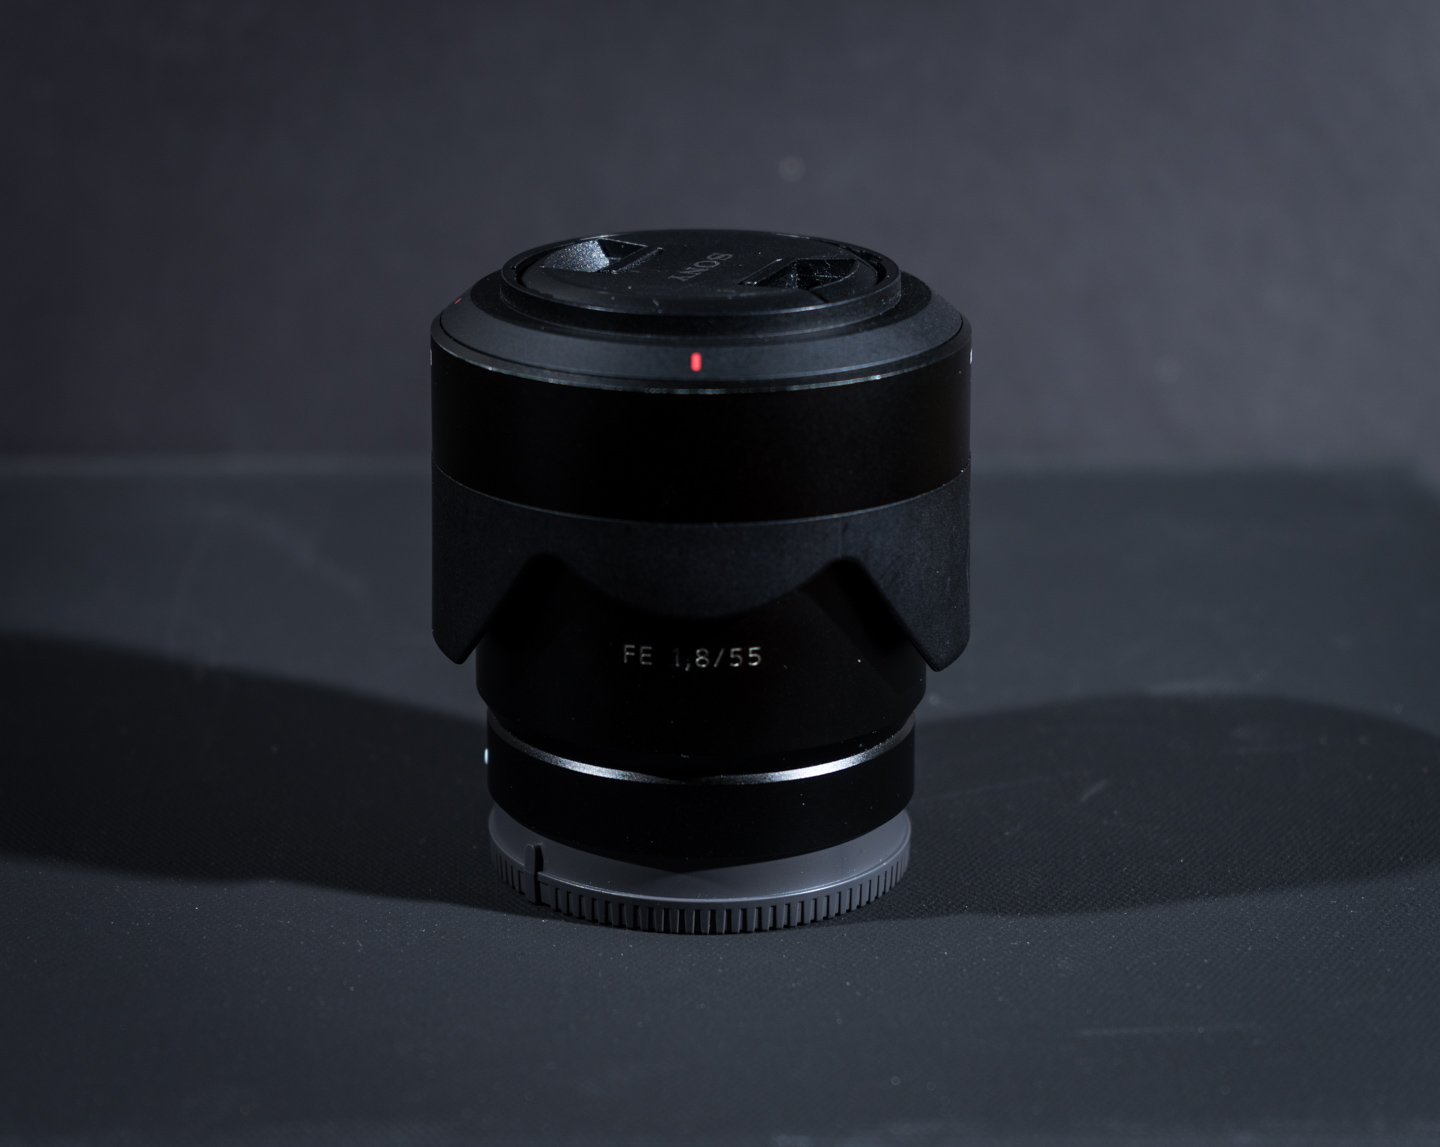 55mm f1.8, for a walkaround lens and whenever I'm shooting in low light